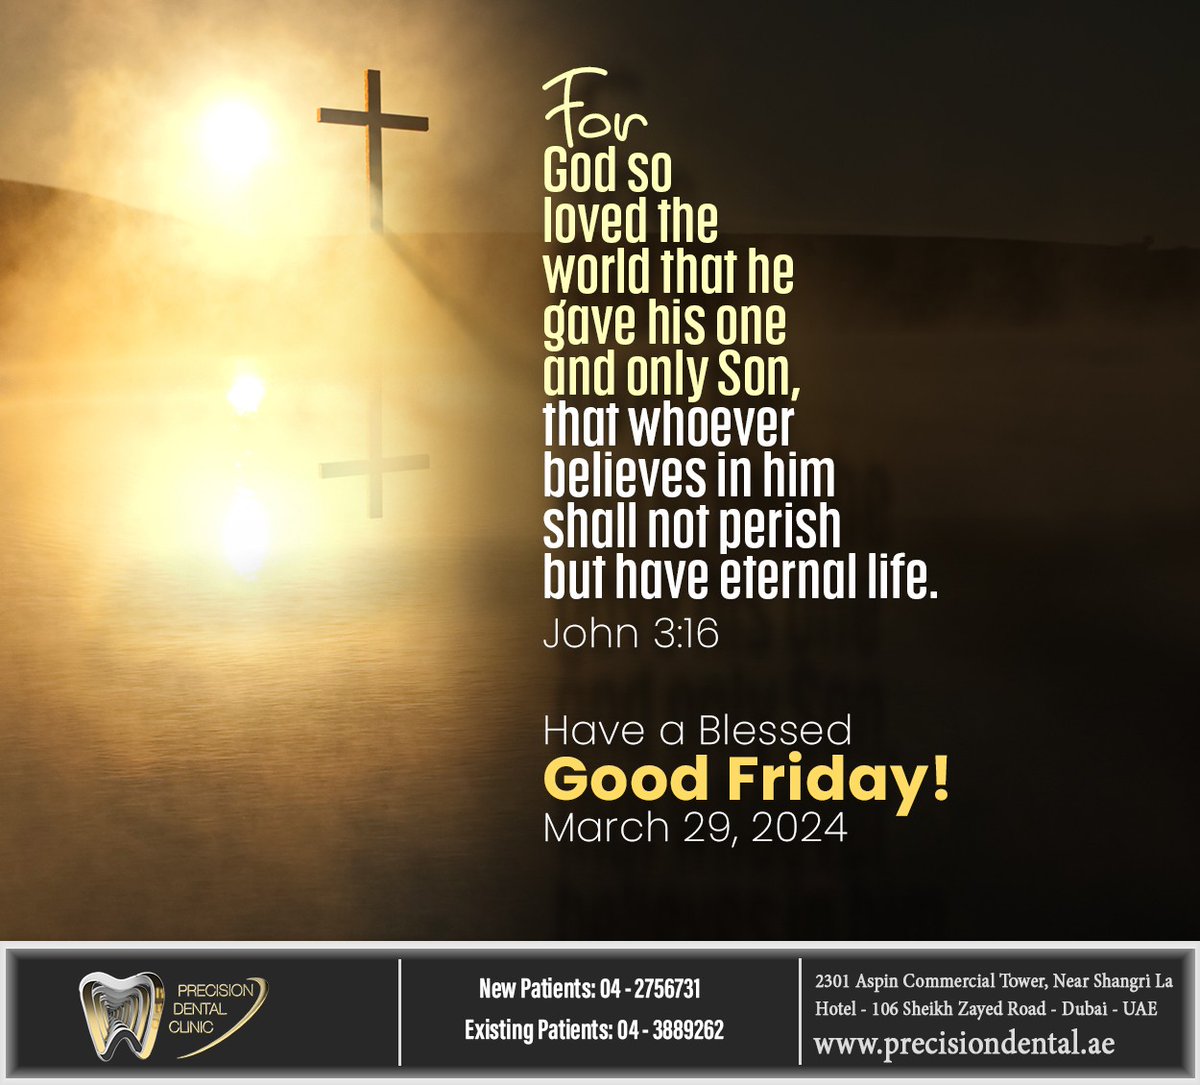 Wishing you a Good Friday filled with God`s blessings. May God bless you with love, joy, and peace and keep you safe always. #goodfriday #precisiondentalclinic #dubai